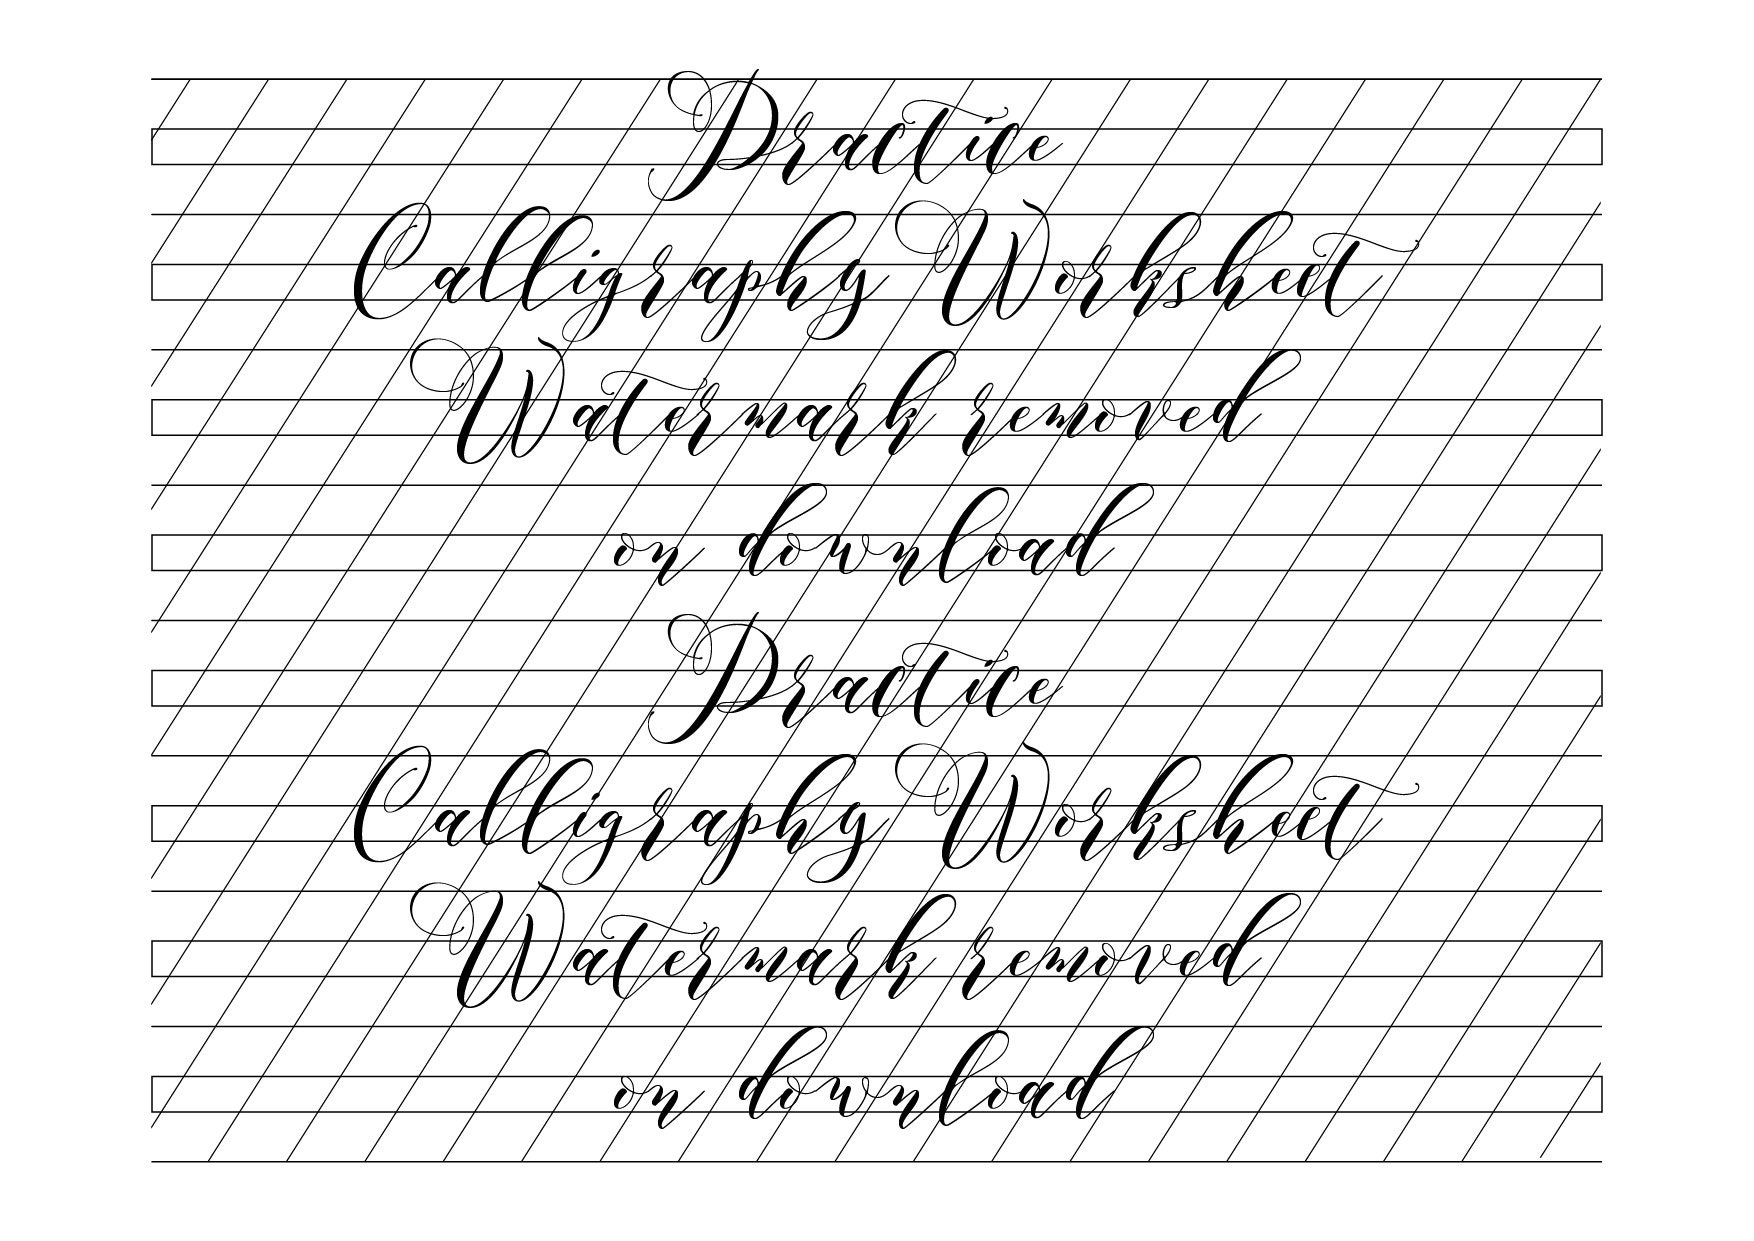 Beginner Level 1 Practice Drills for Copperplate Calligraphy: Digital  Download Worksheet One-pager for Beginners in Traditional Calligraphy 